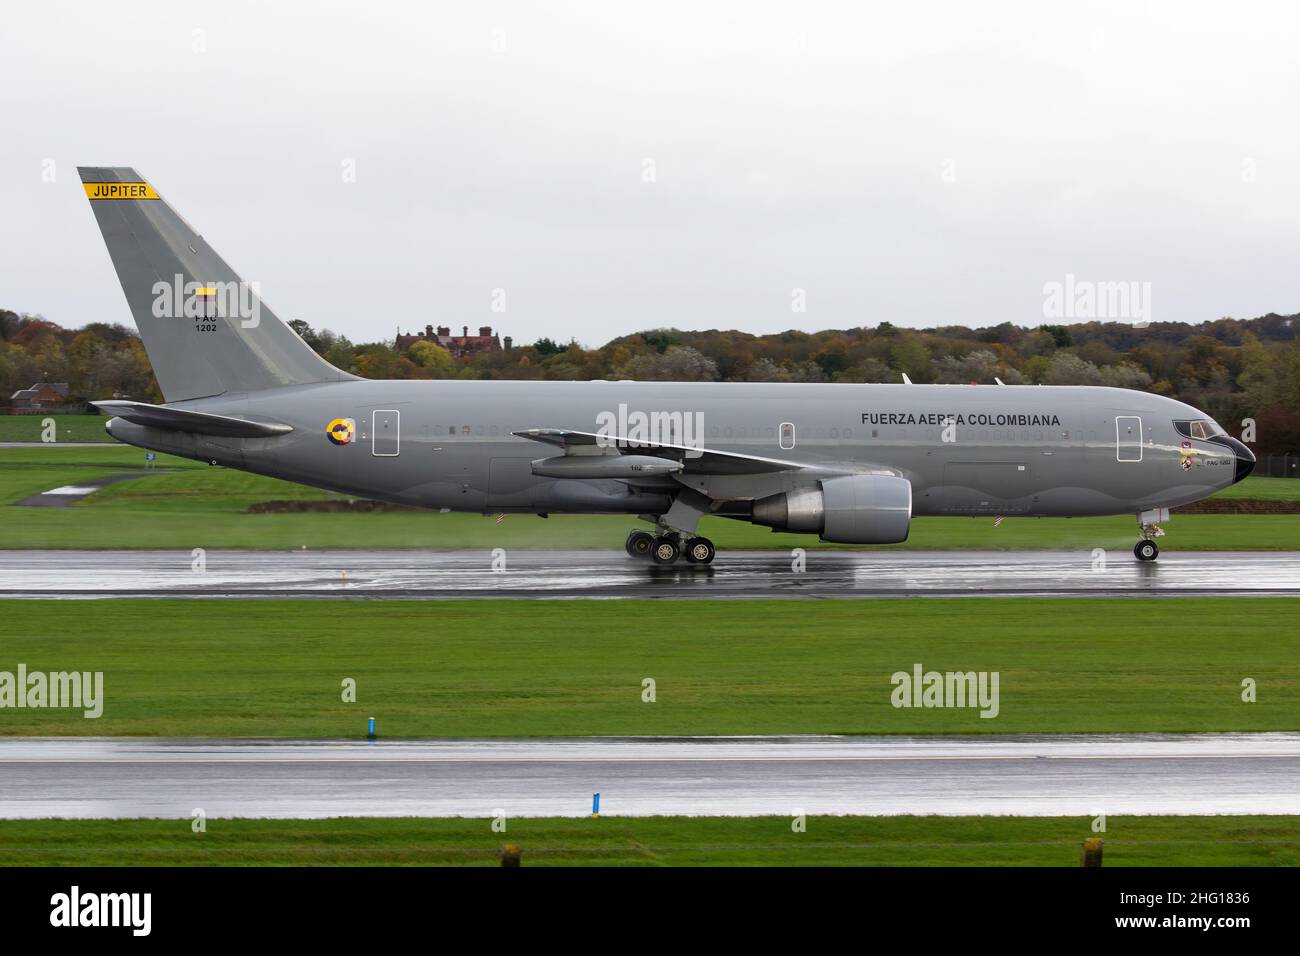 Colombian Air Force / Fuerza Aerea Colombiana Boeing 767-200 MRTT arriving at Glasgow Prestwick airport bringing President Iván Duque Márquez to COP26 Stock Photo